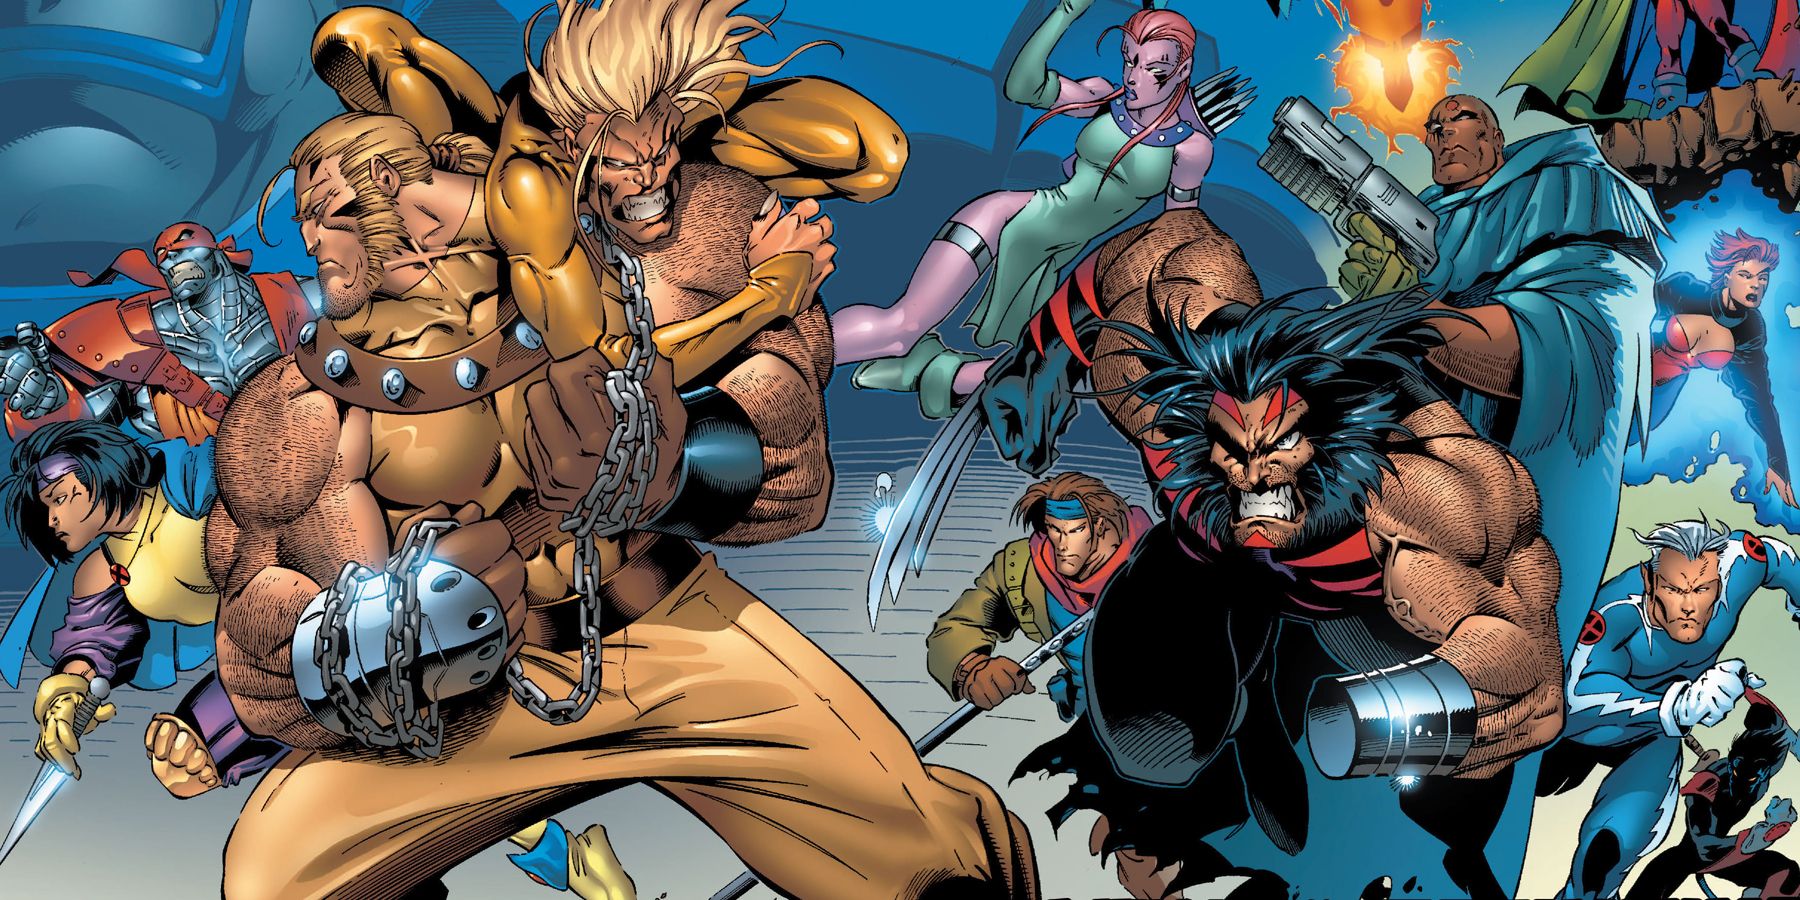 Wolverine leads the new X-Men in Age of Apocalypse